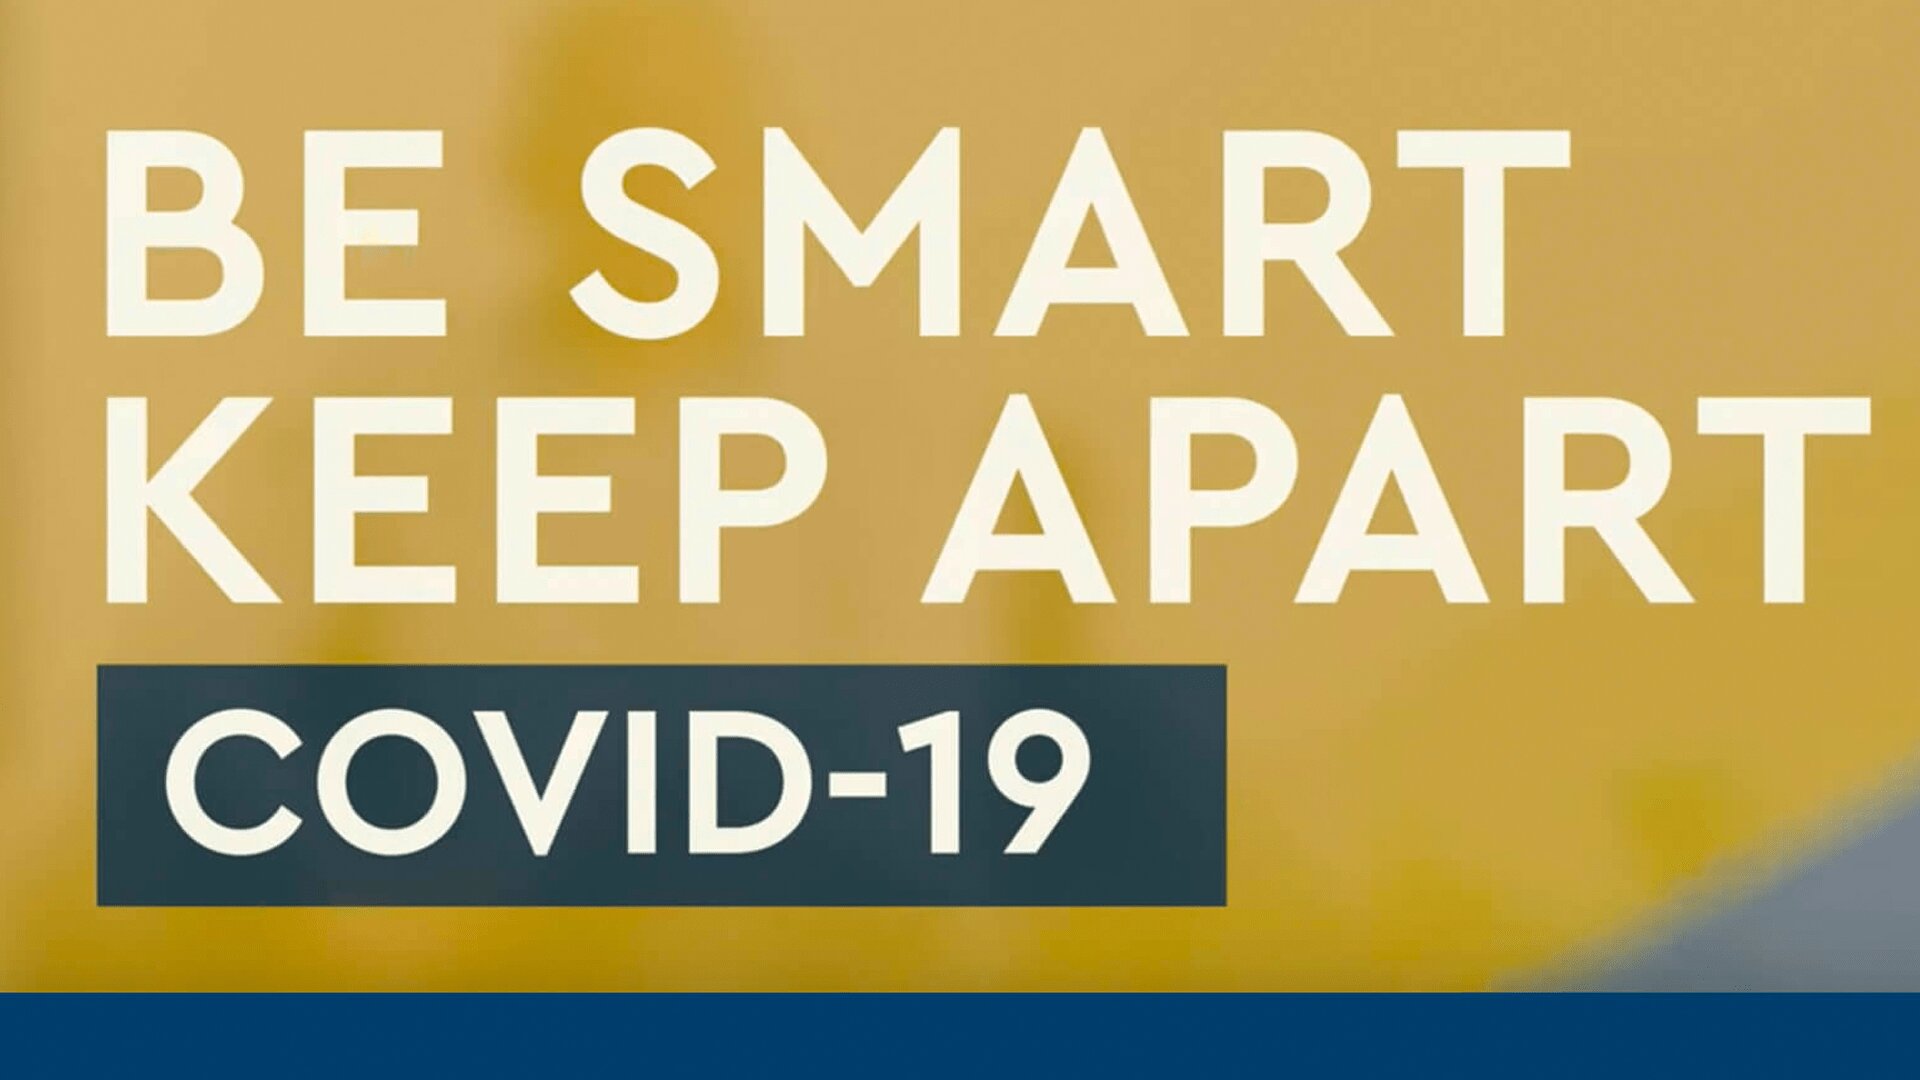 Be prepared and keep apart during COVID-19